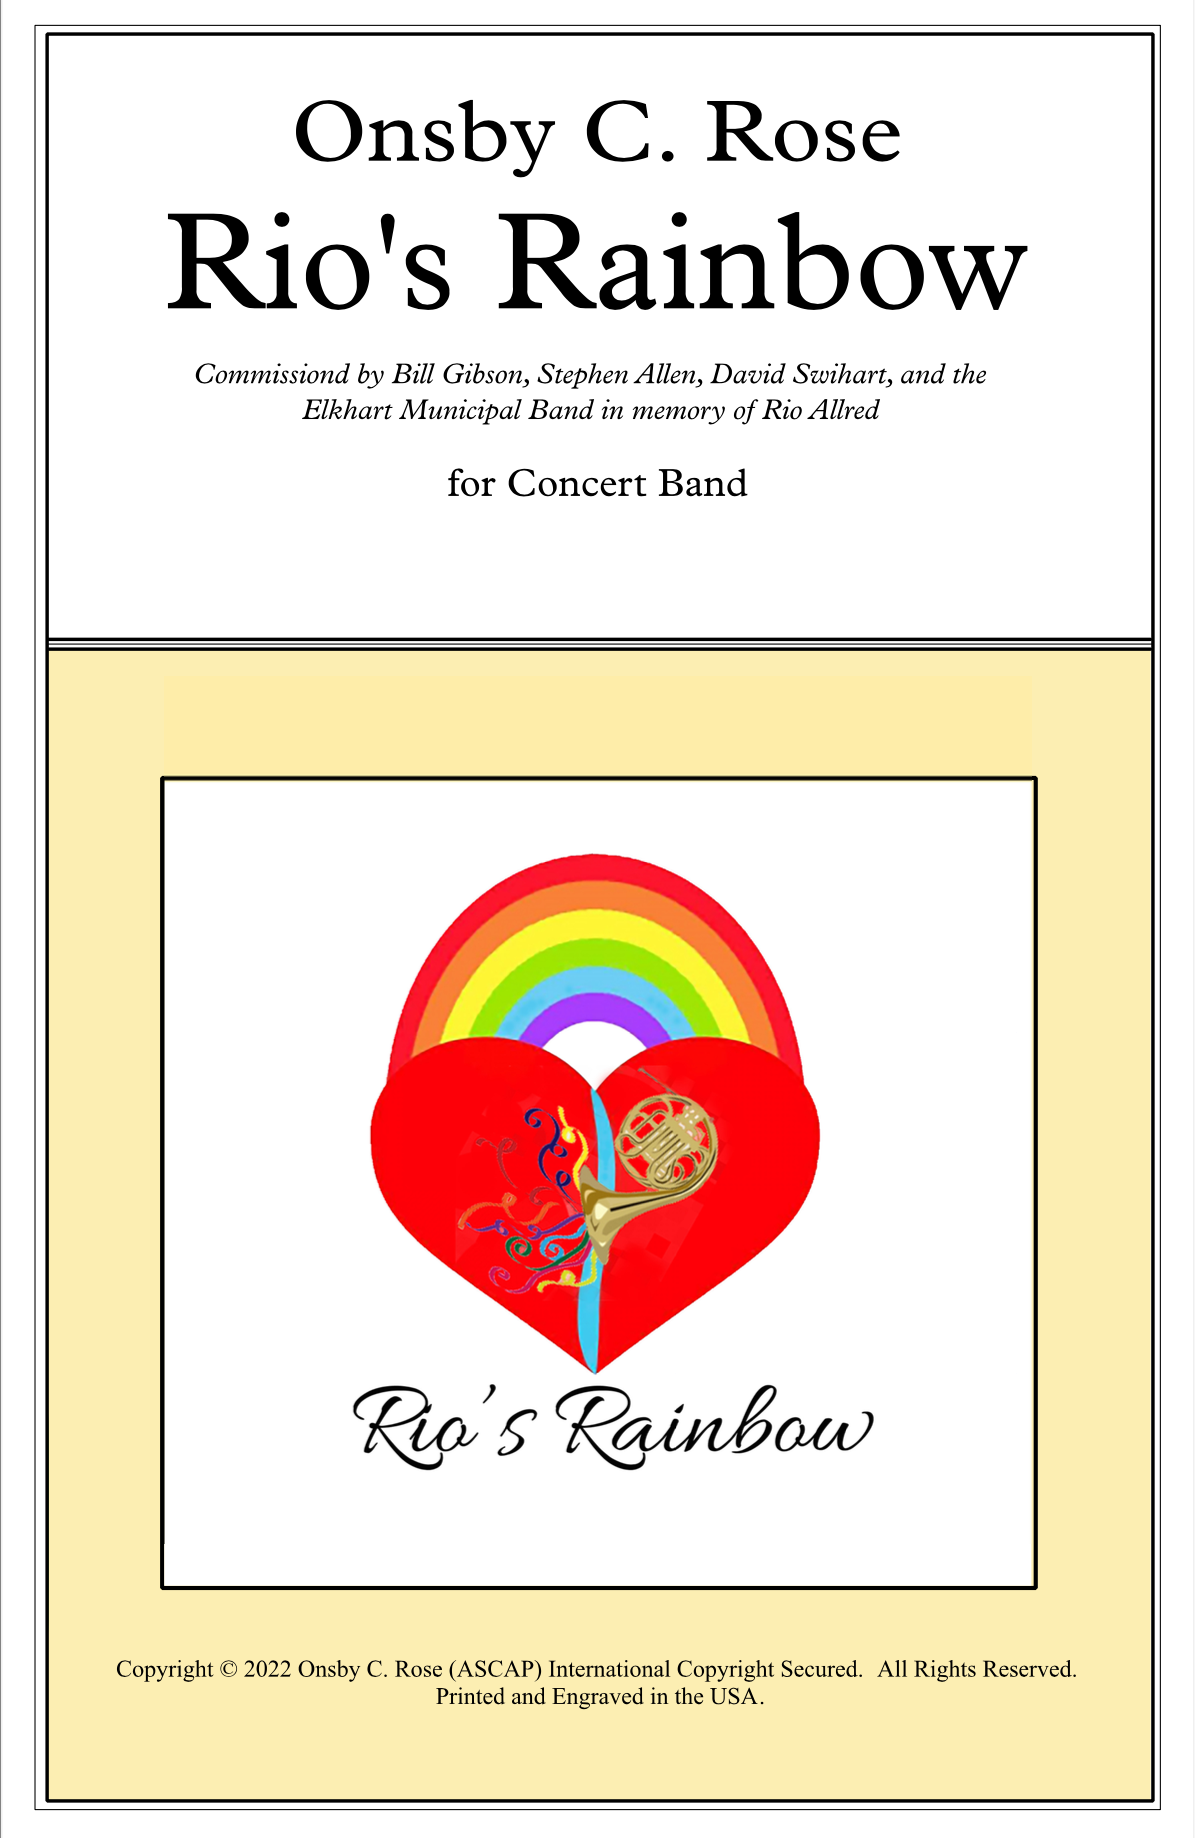 Rio's Rainbow by Onsby C. Rose